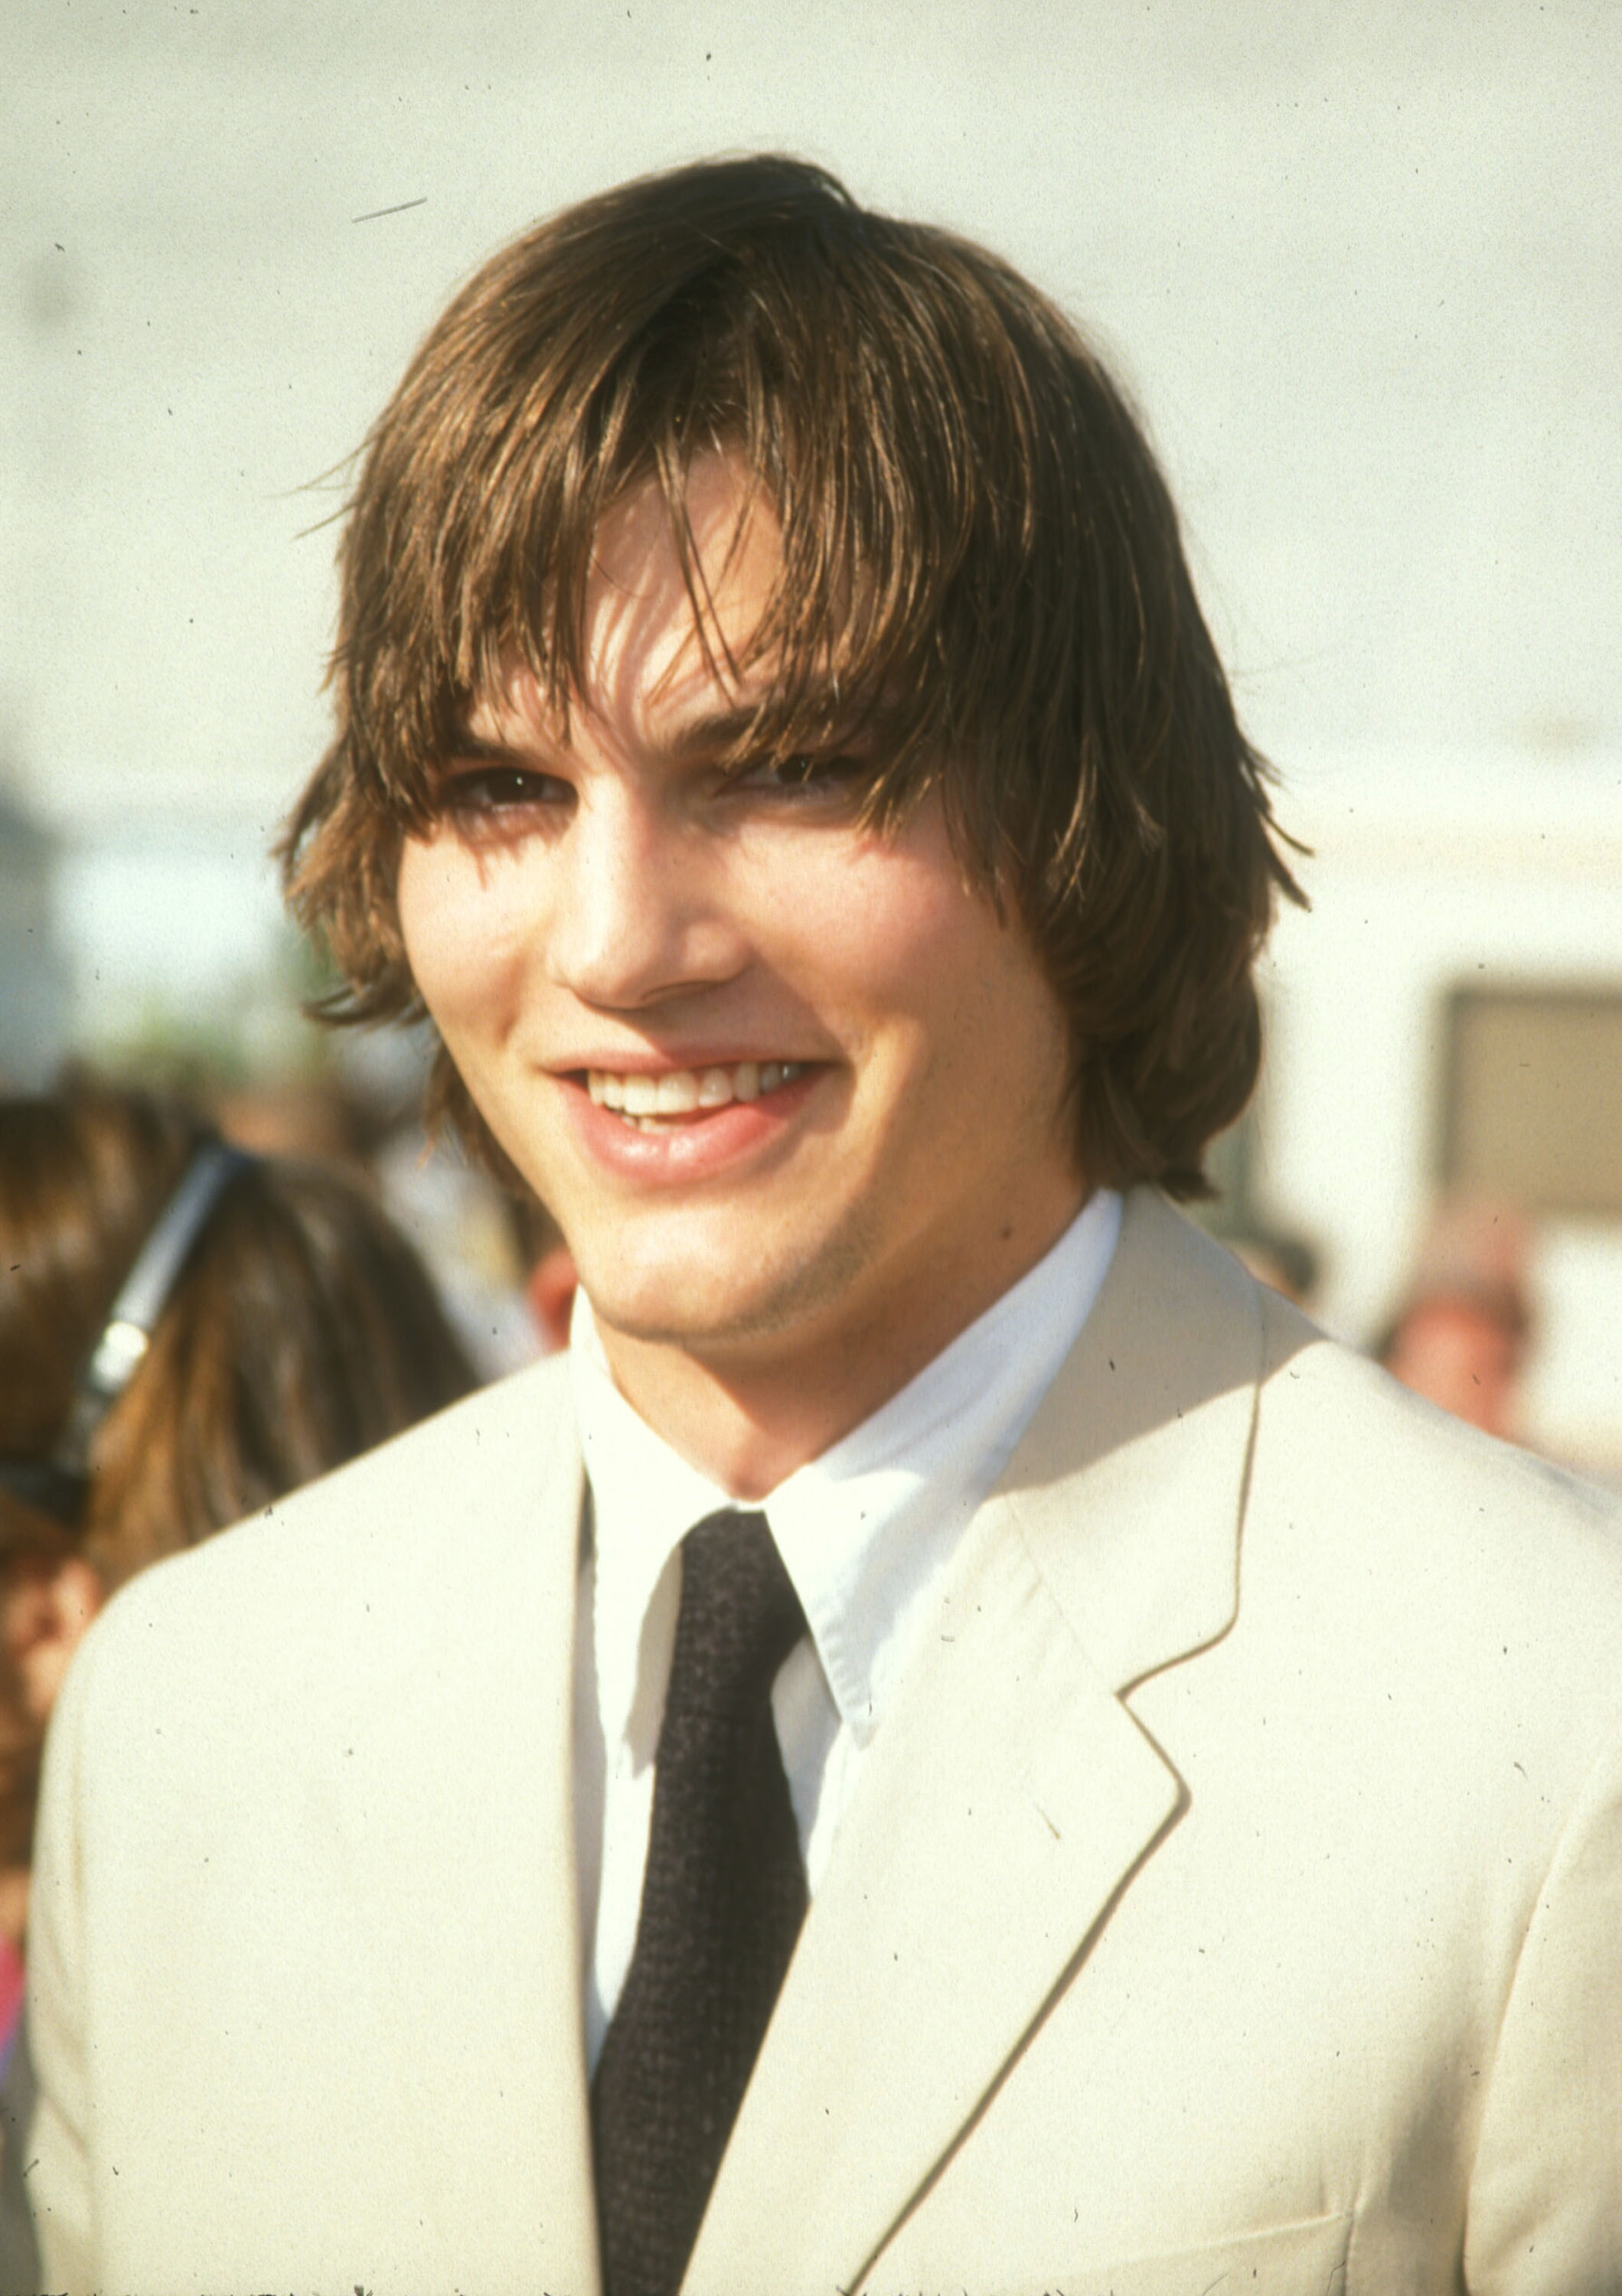 Ashton Kutcher during the 1st Annual Teen Choice Awards in Santa Monica, California | Source: Getty Images